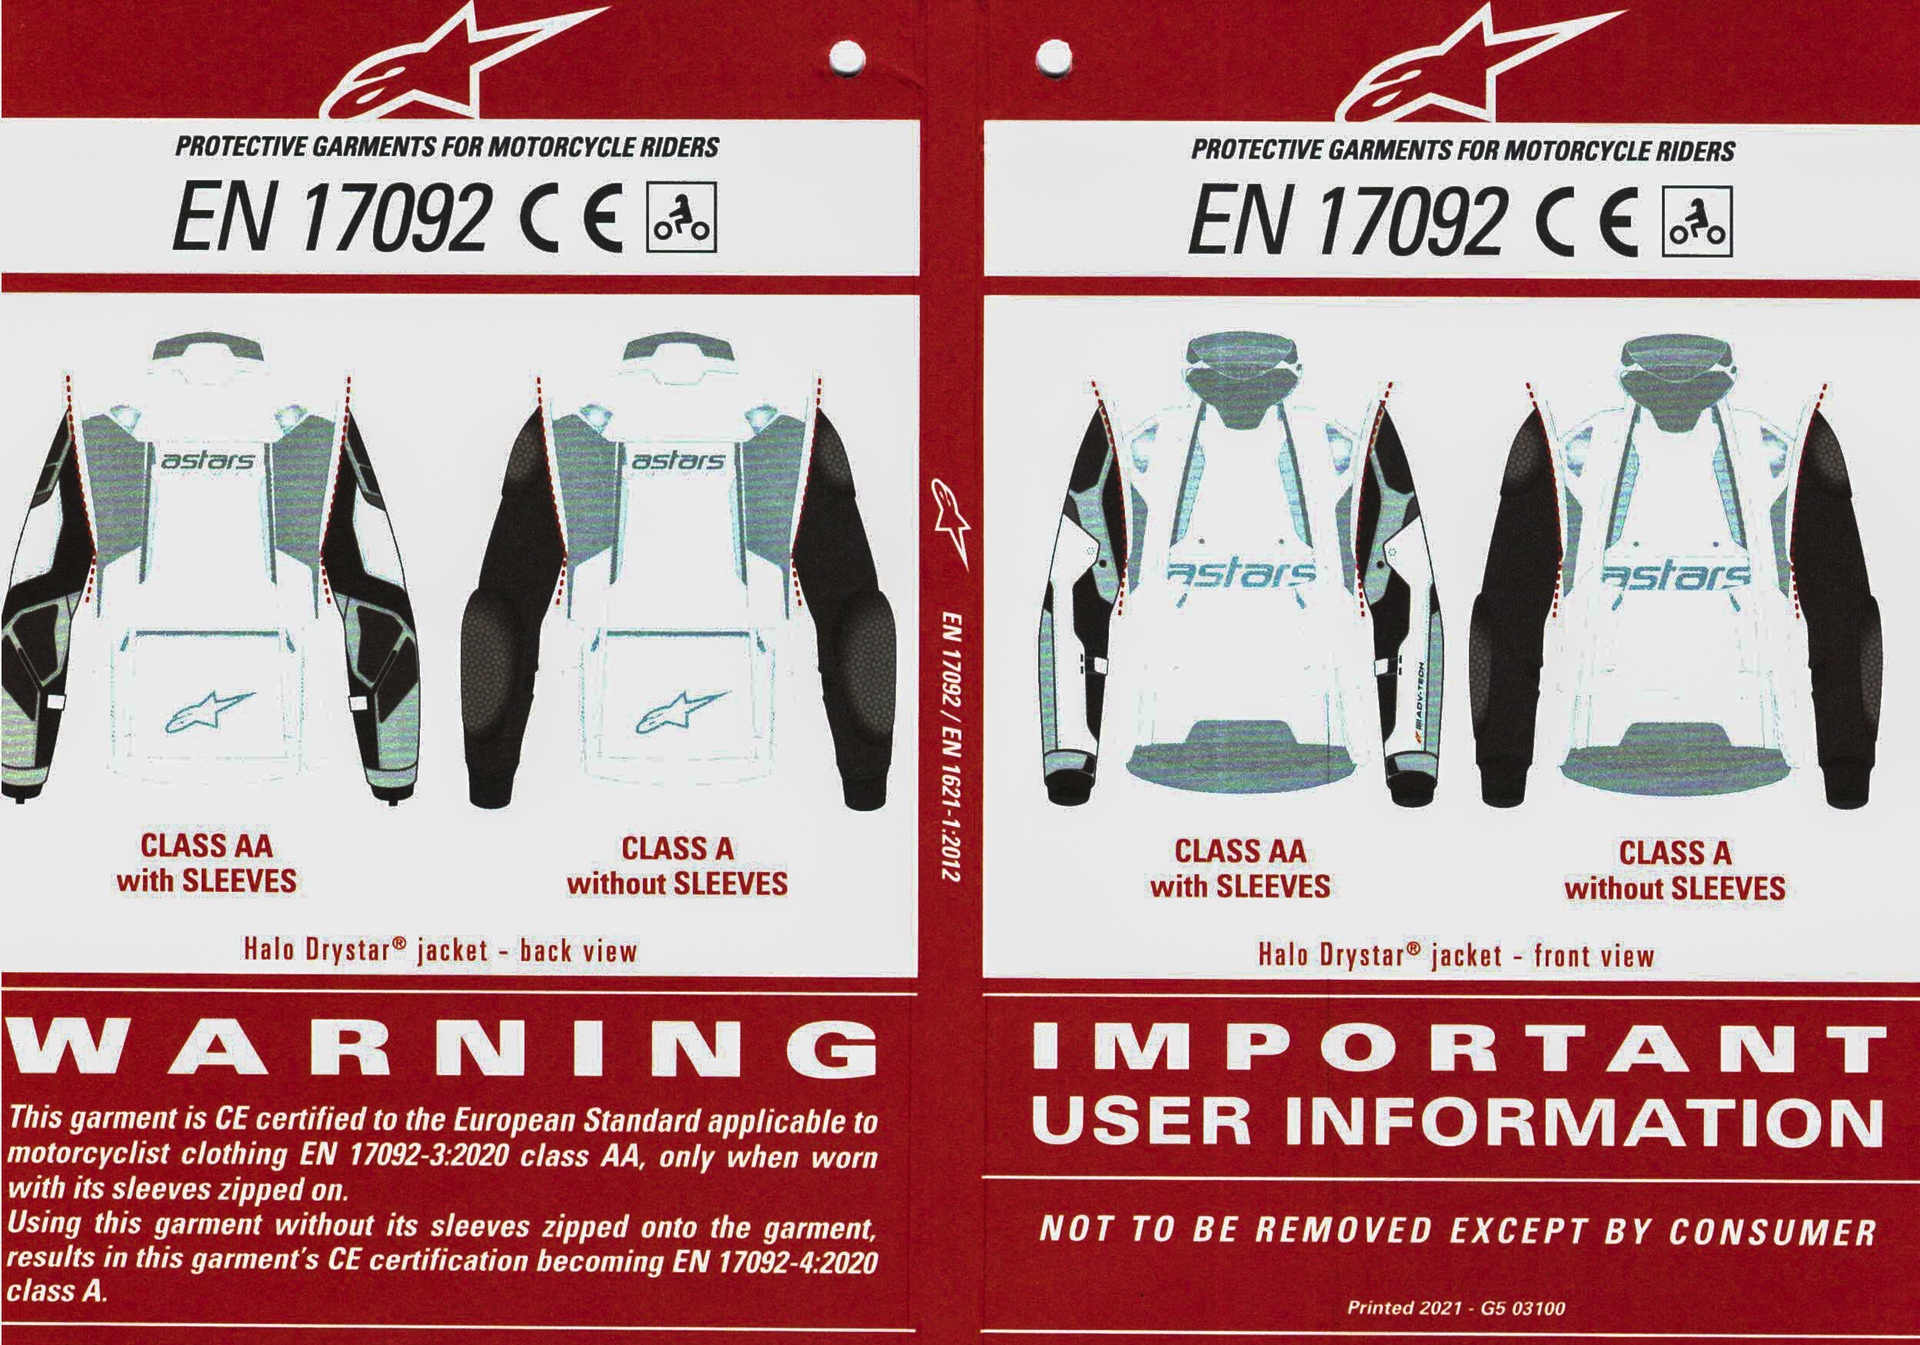 Label for Alpinestars Halo Drystar Jacket explaining Class rating with sleeves on or off